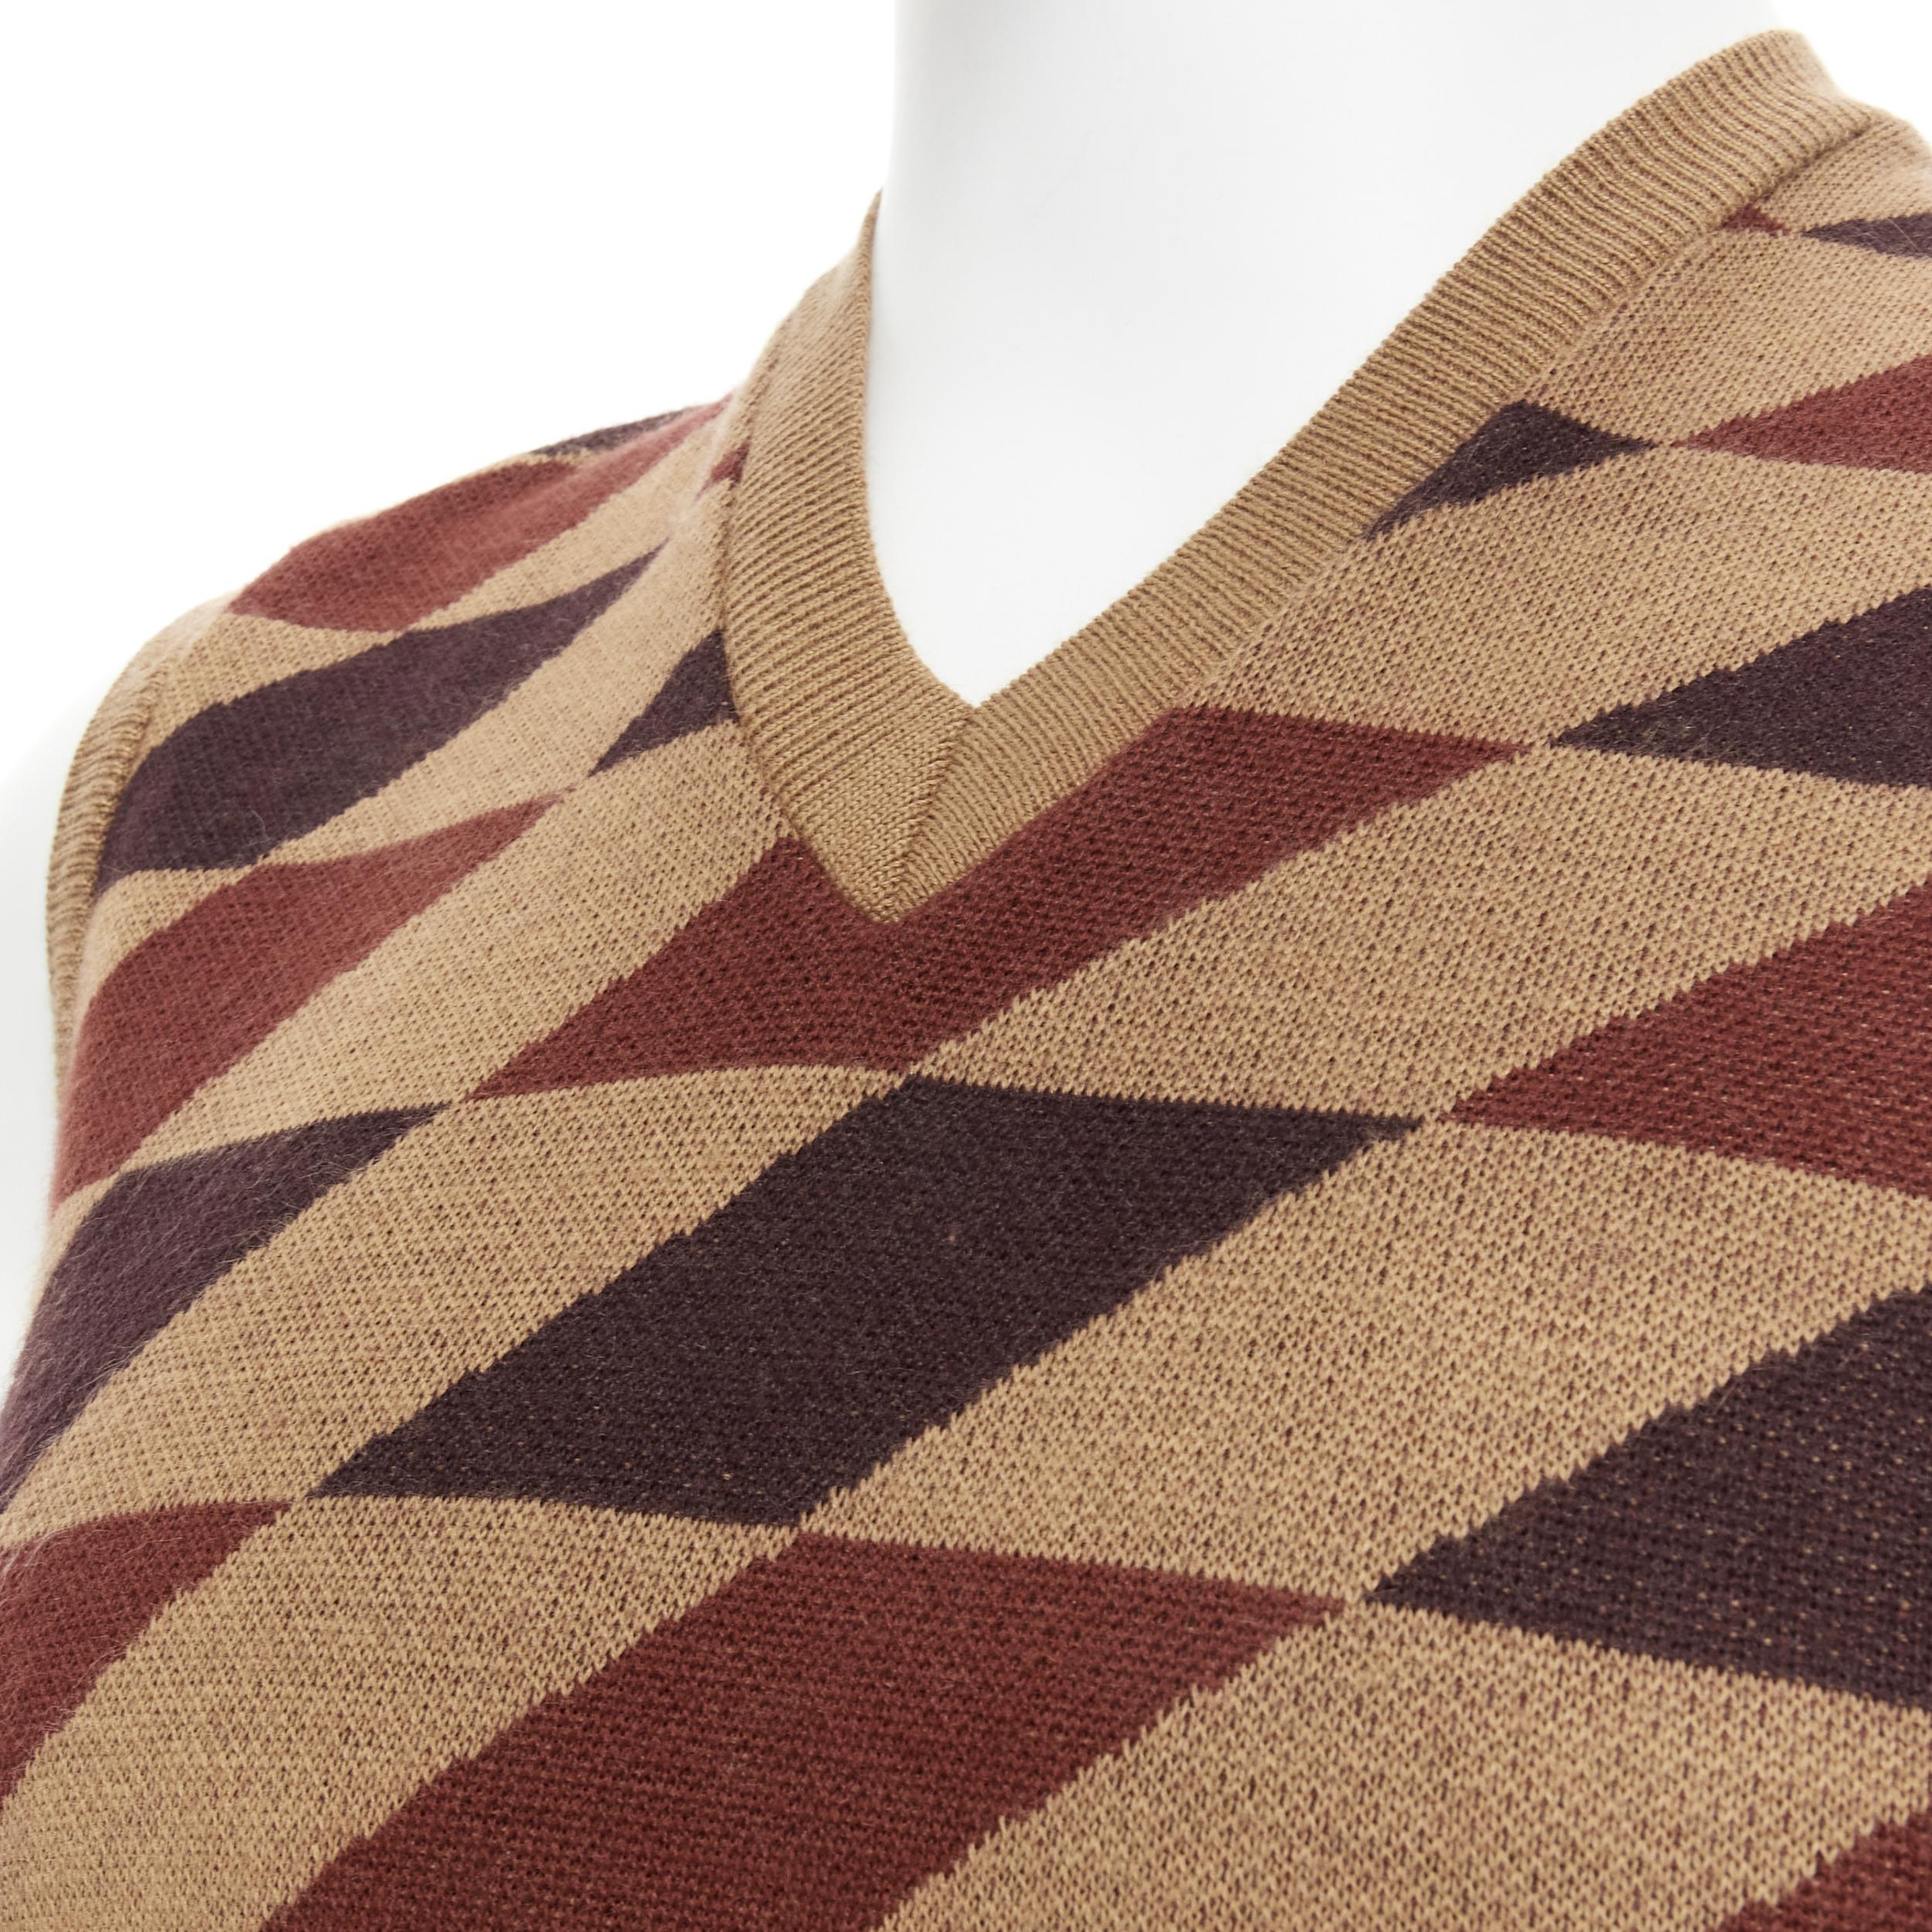 N HOOLYWOOD brown argyle check acrylic wool knit V-neck sweater vest IT36 S 
Reference: JOMK/A00055 
Brand: N Hoolywood 
Material: Acrylic 
Color: Brown 
Pattern: Check
Made in: Japan 

CONDITION: 
Condition: Excellent, this item was pre-owned and